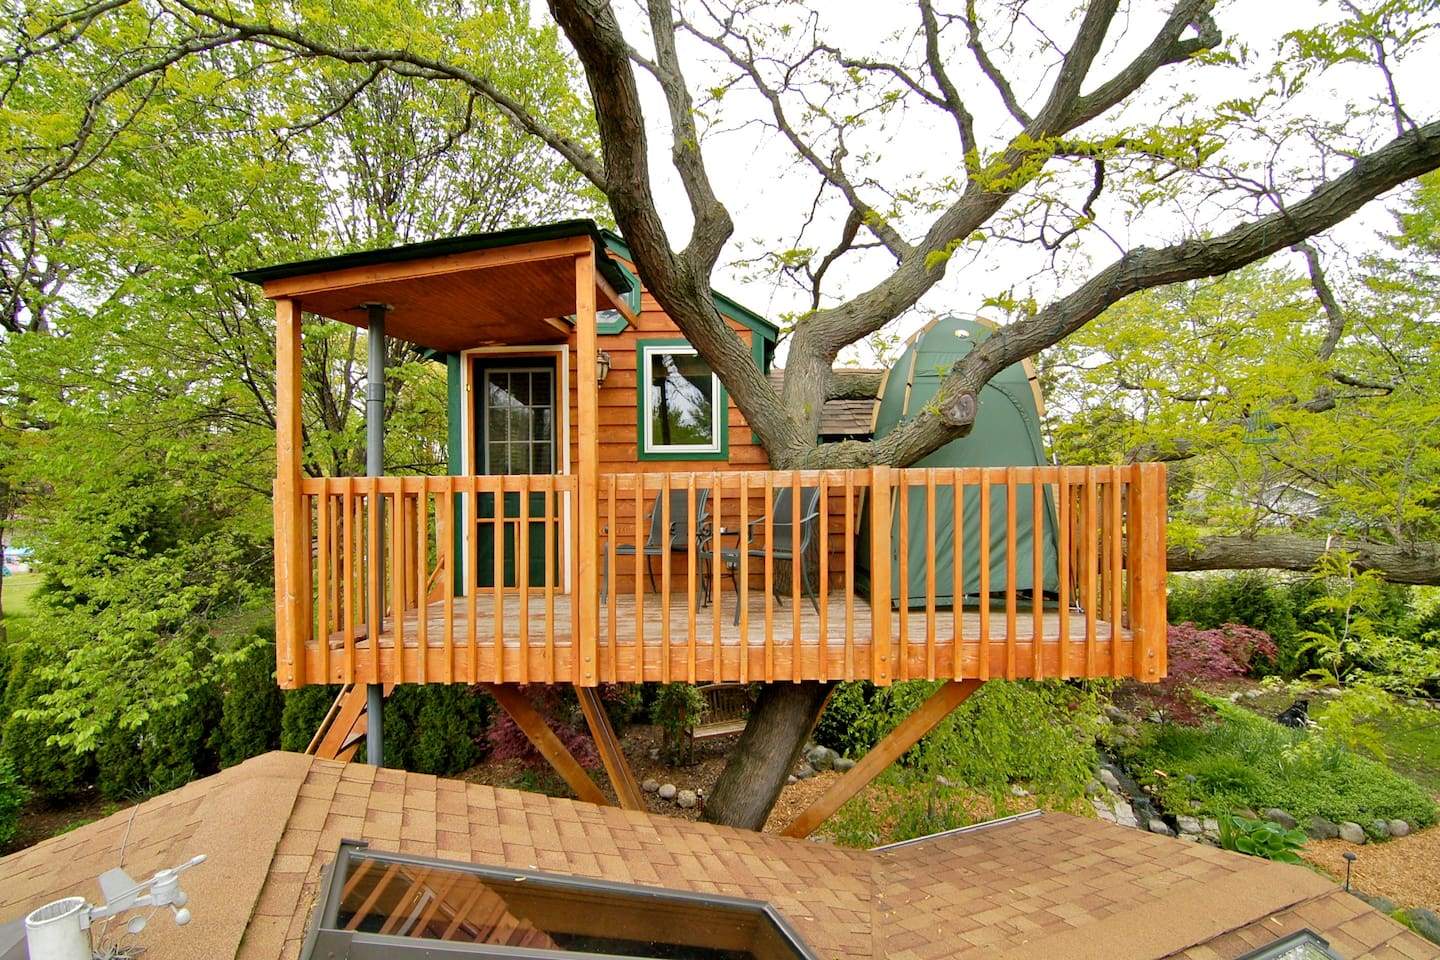 9 Tiny Houses in Illinois You Can Rent on Airbnb in 2021!